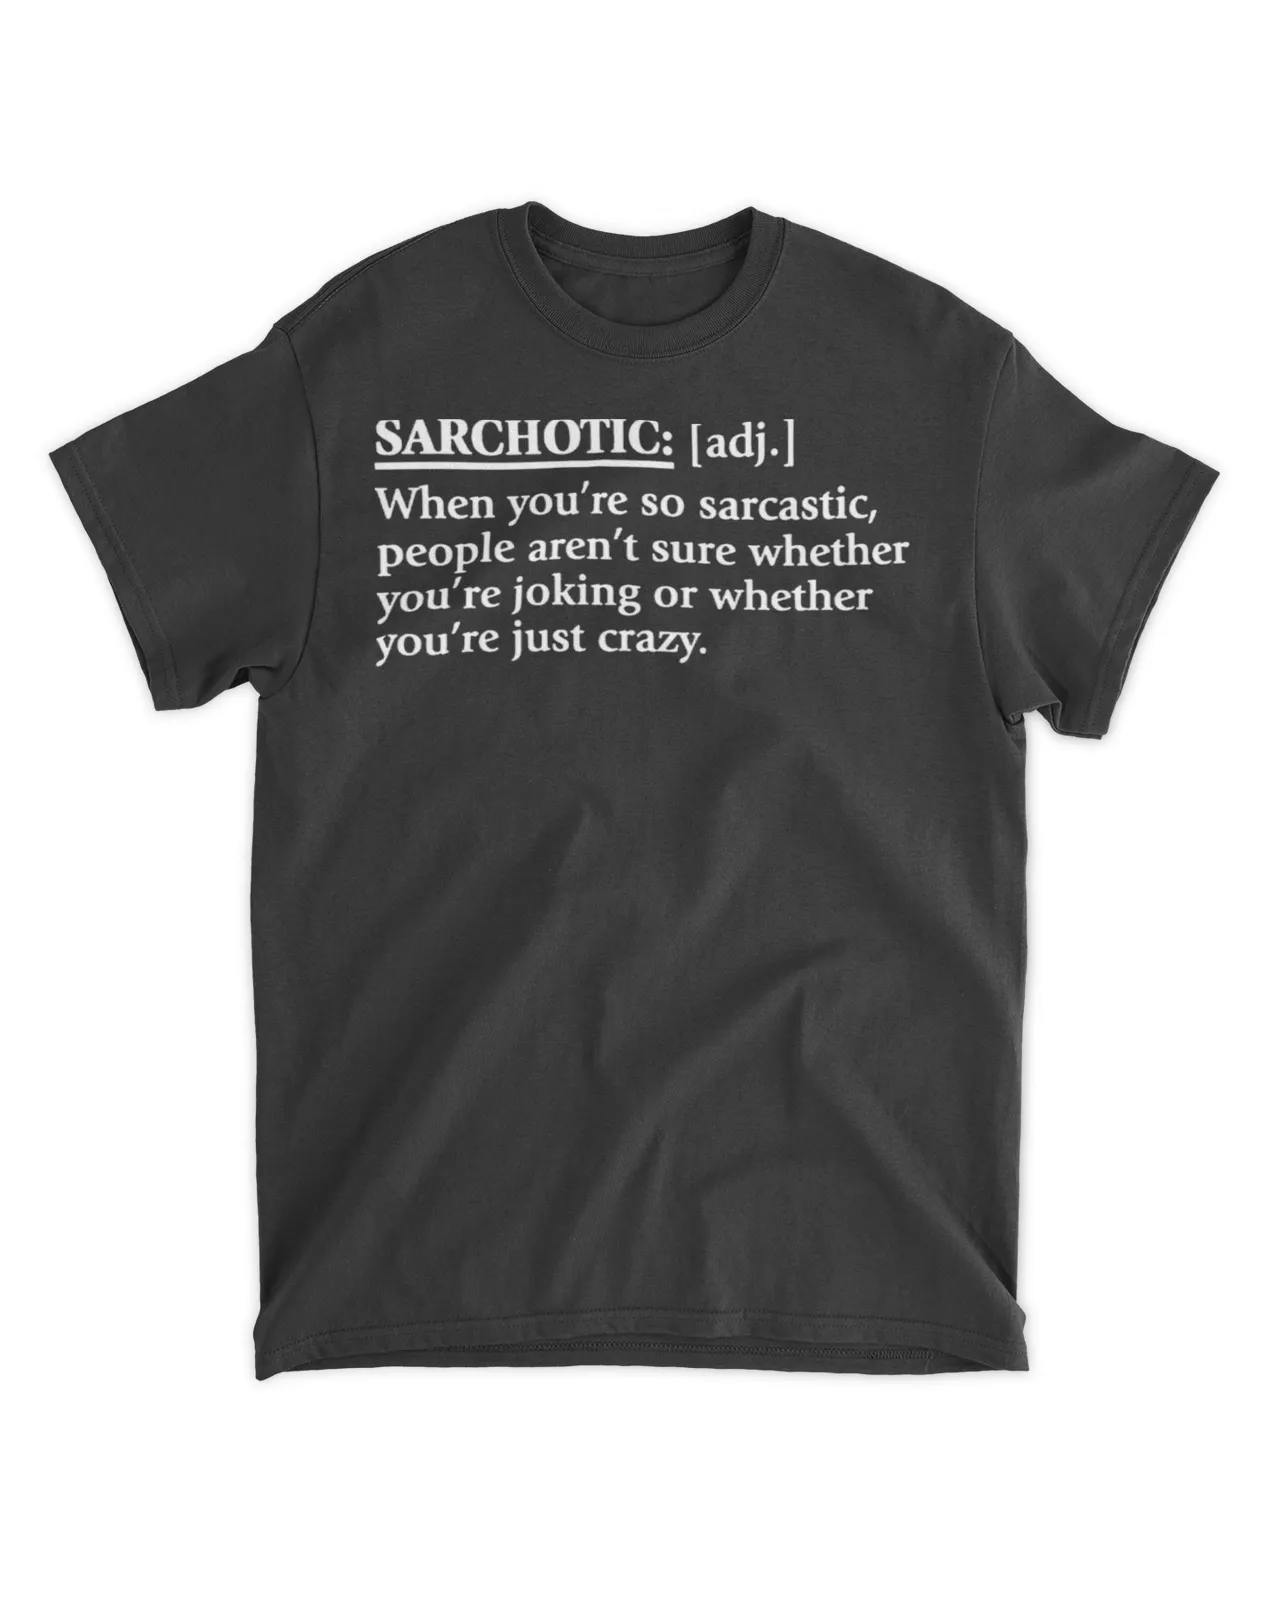  Sarchotic when you're so sarcastic people aren't sure whether you're joking or whether you're just crazy shirt